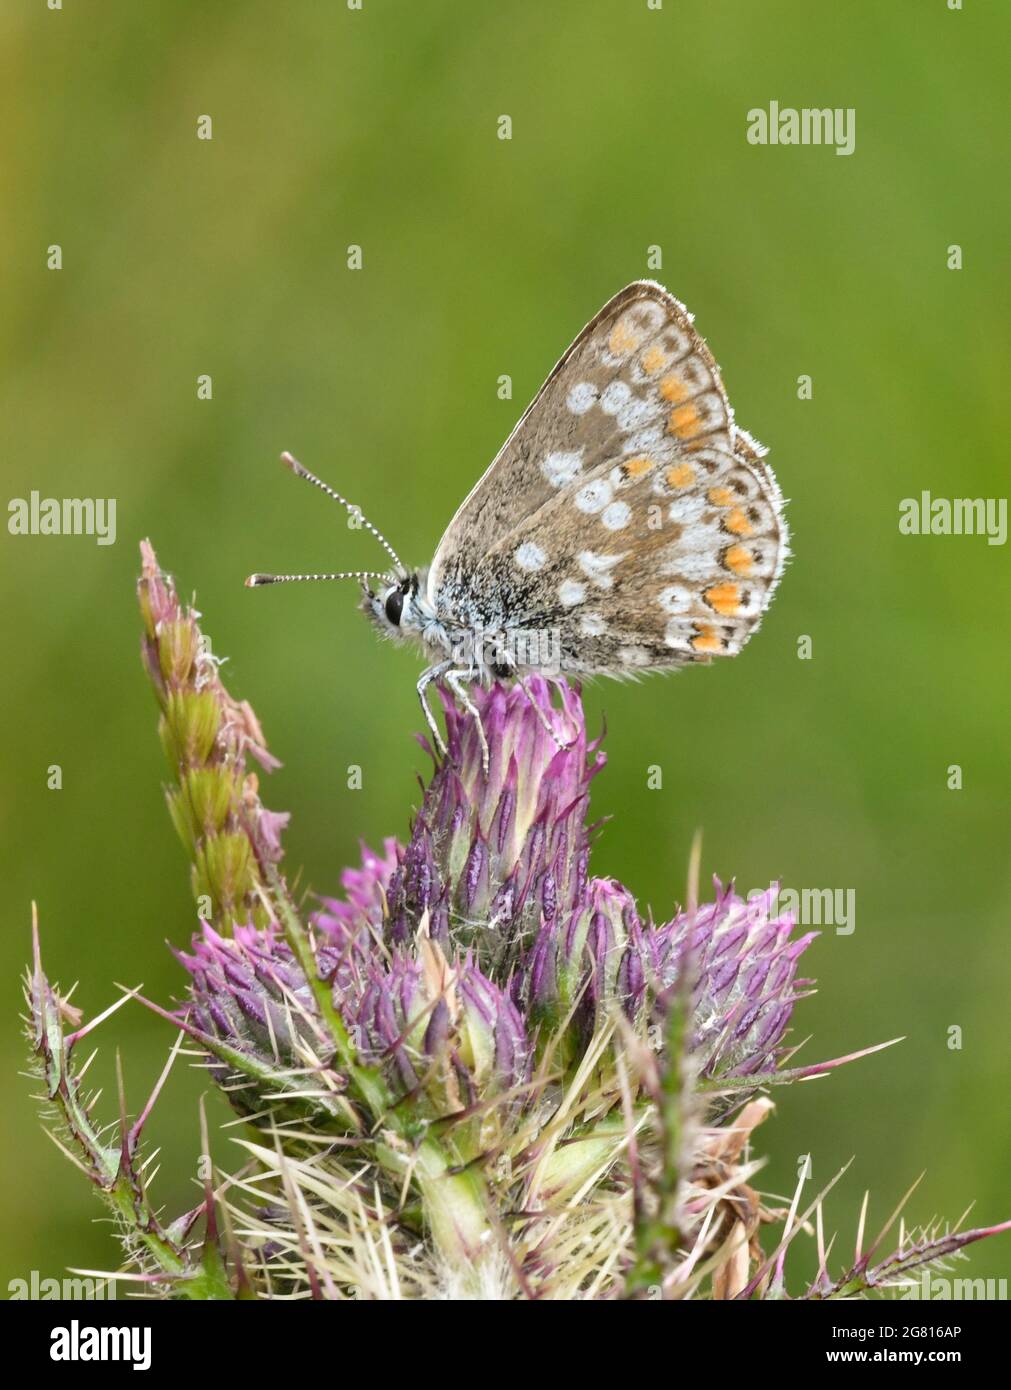 A Northern brown argus butterfly (Aricia artaxerxes) photographed in lanarkshire, Scotland Stock Photo